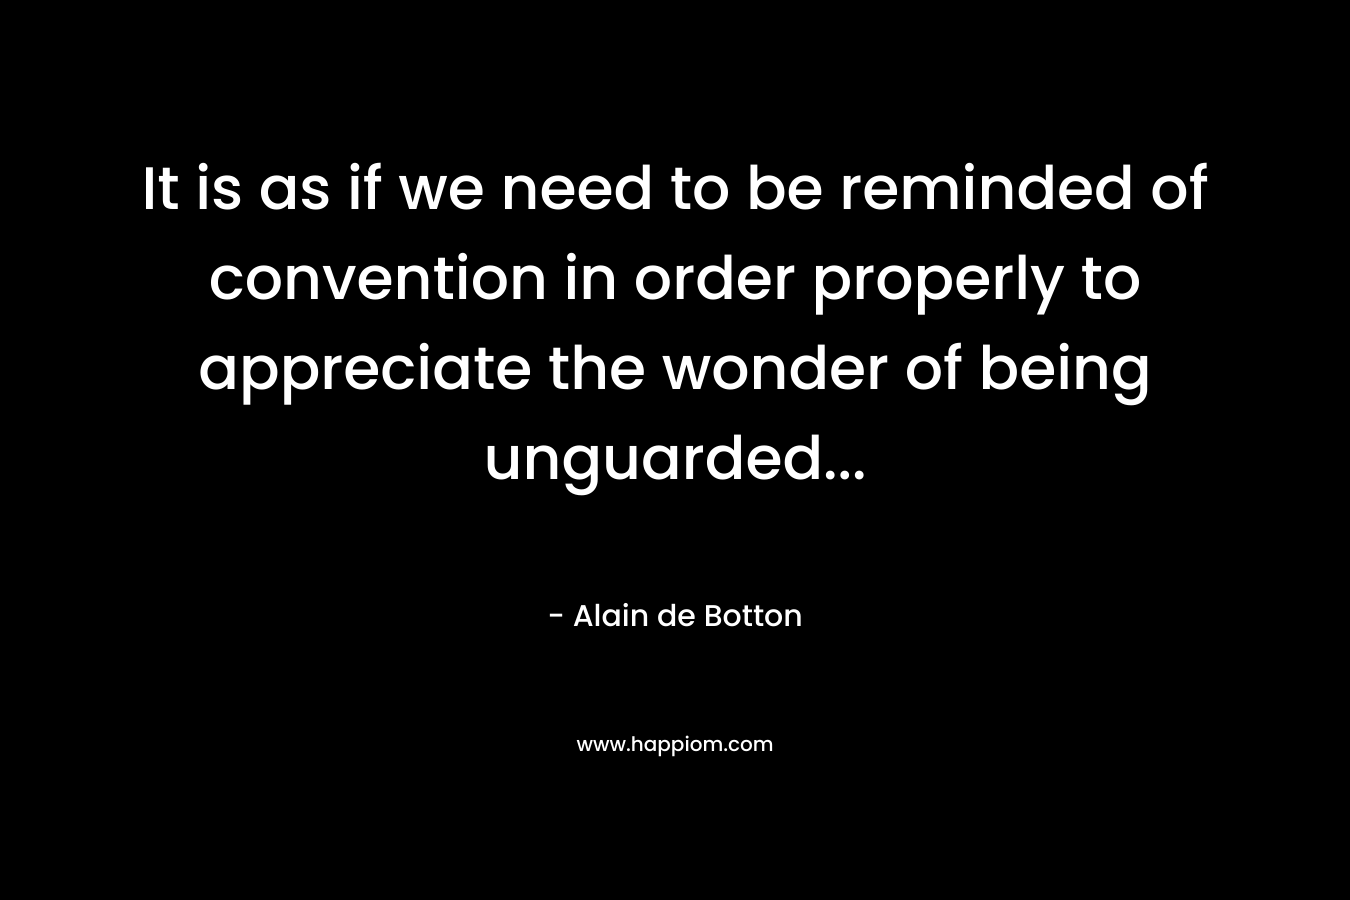 It is as if we need to be reminded of convention in order properly to appreciate the wonder of being unguarded...